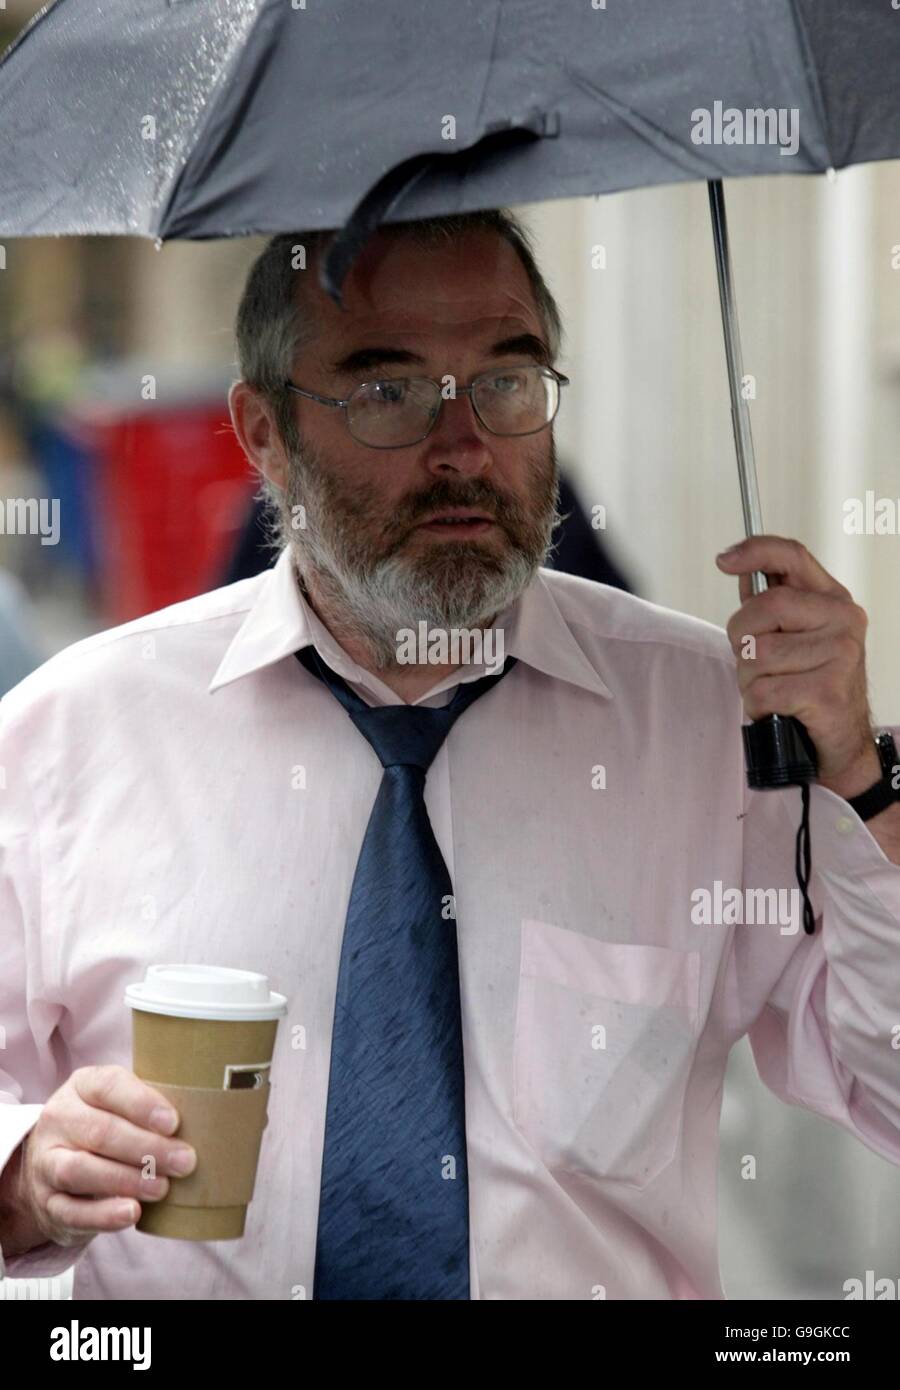 Paul Milling, who is accused of sabotaging military equipment at RAF Fairford, Gloucestershire, arrives at Bristol Crown Court to hear the jury's verdict on his trial. Stock Photo